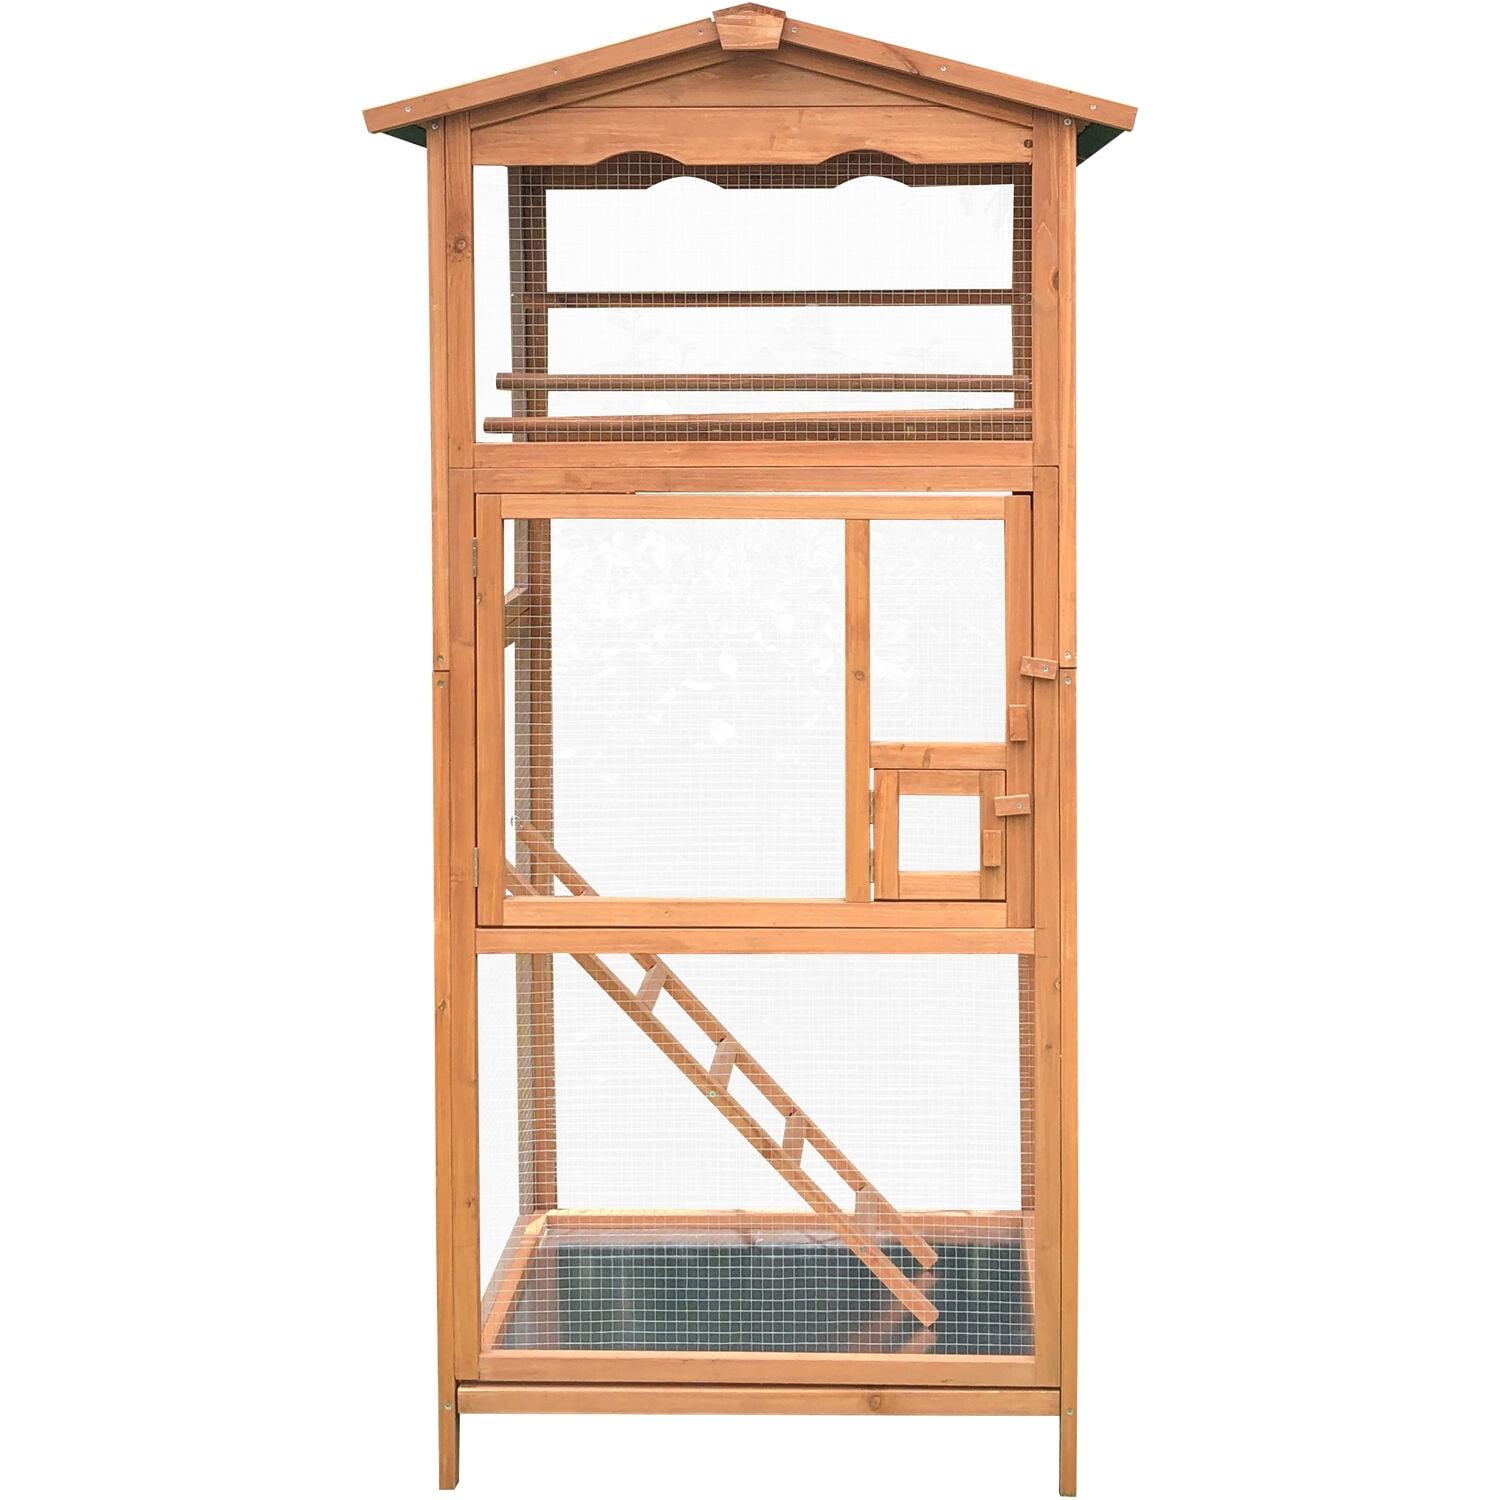 Hanover Rustic Stained Fir Wood Outdoor Bird Cage with Waterproof Roof